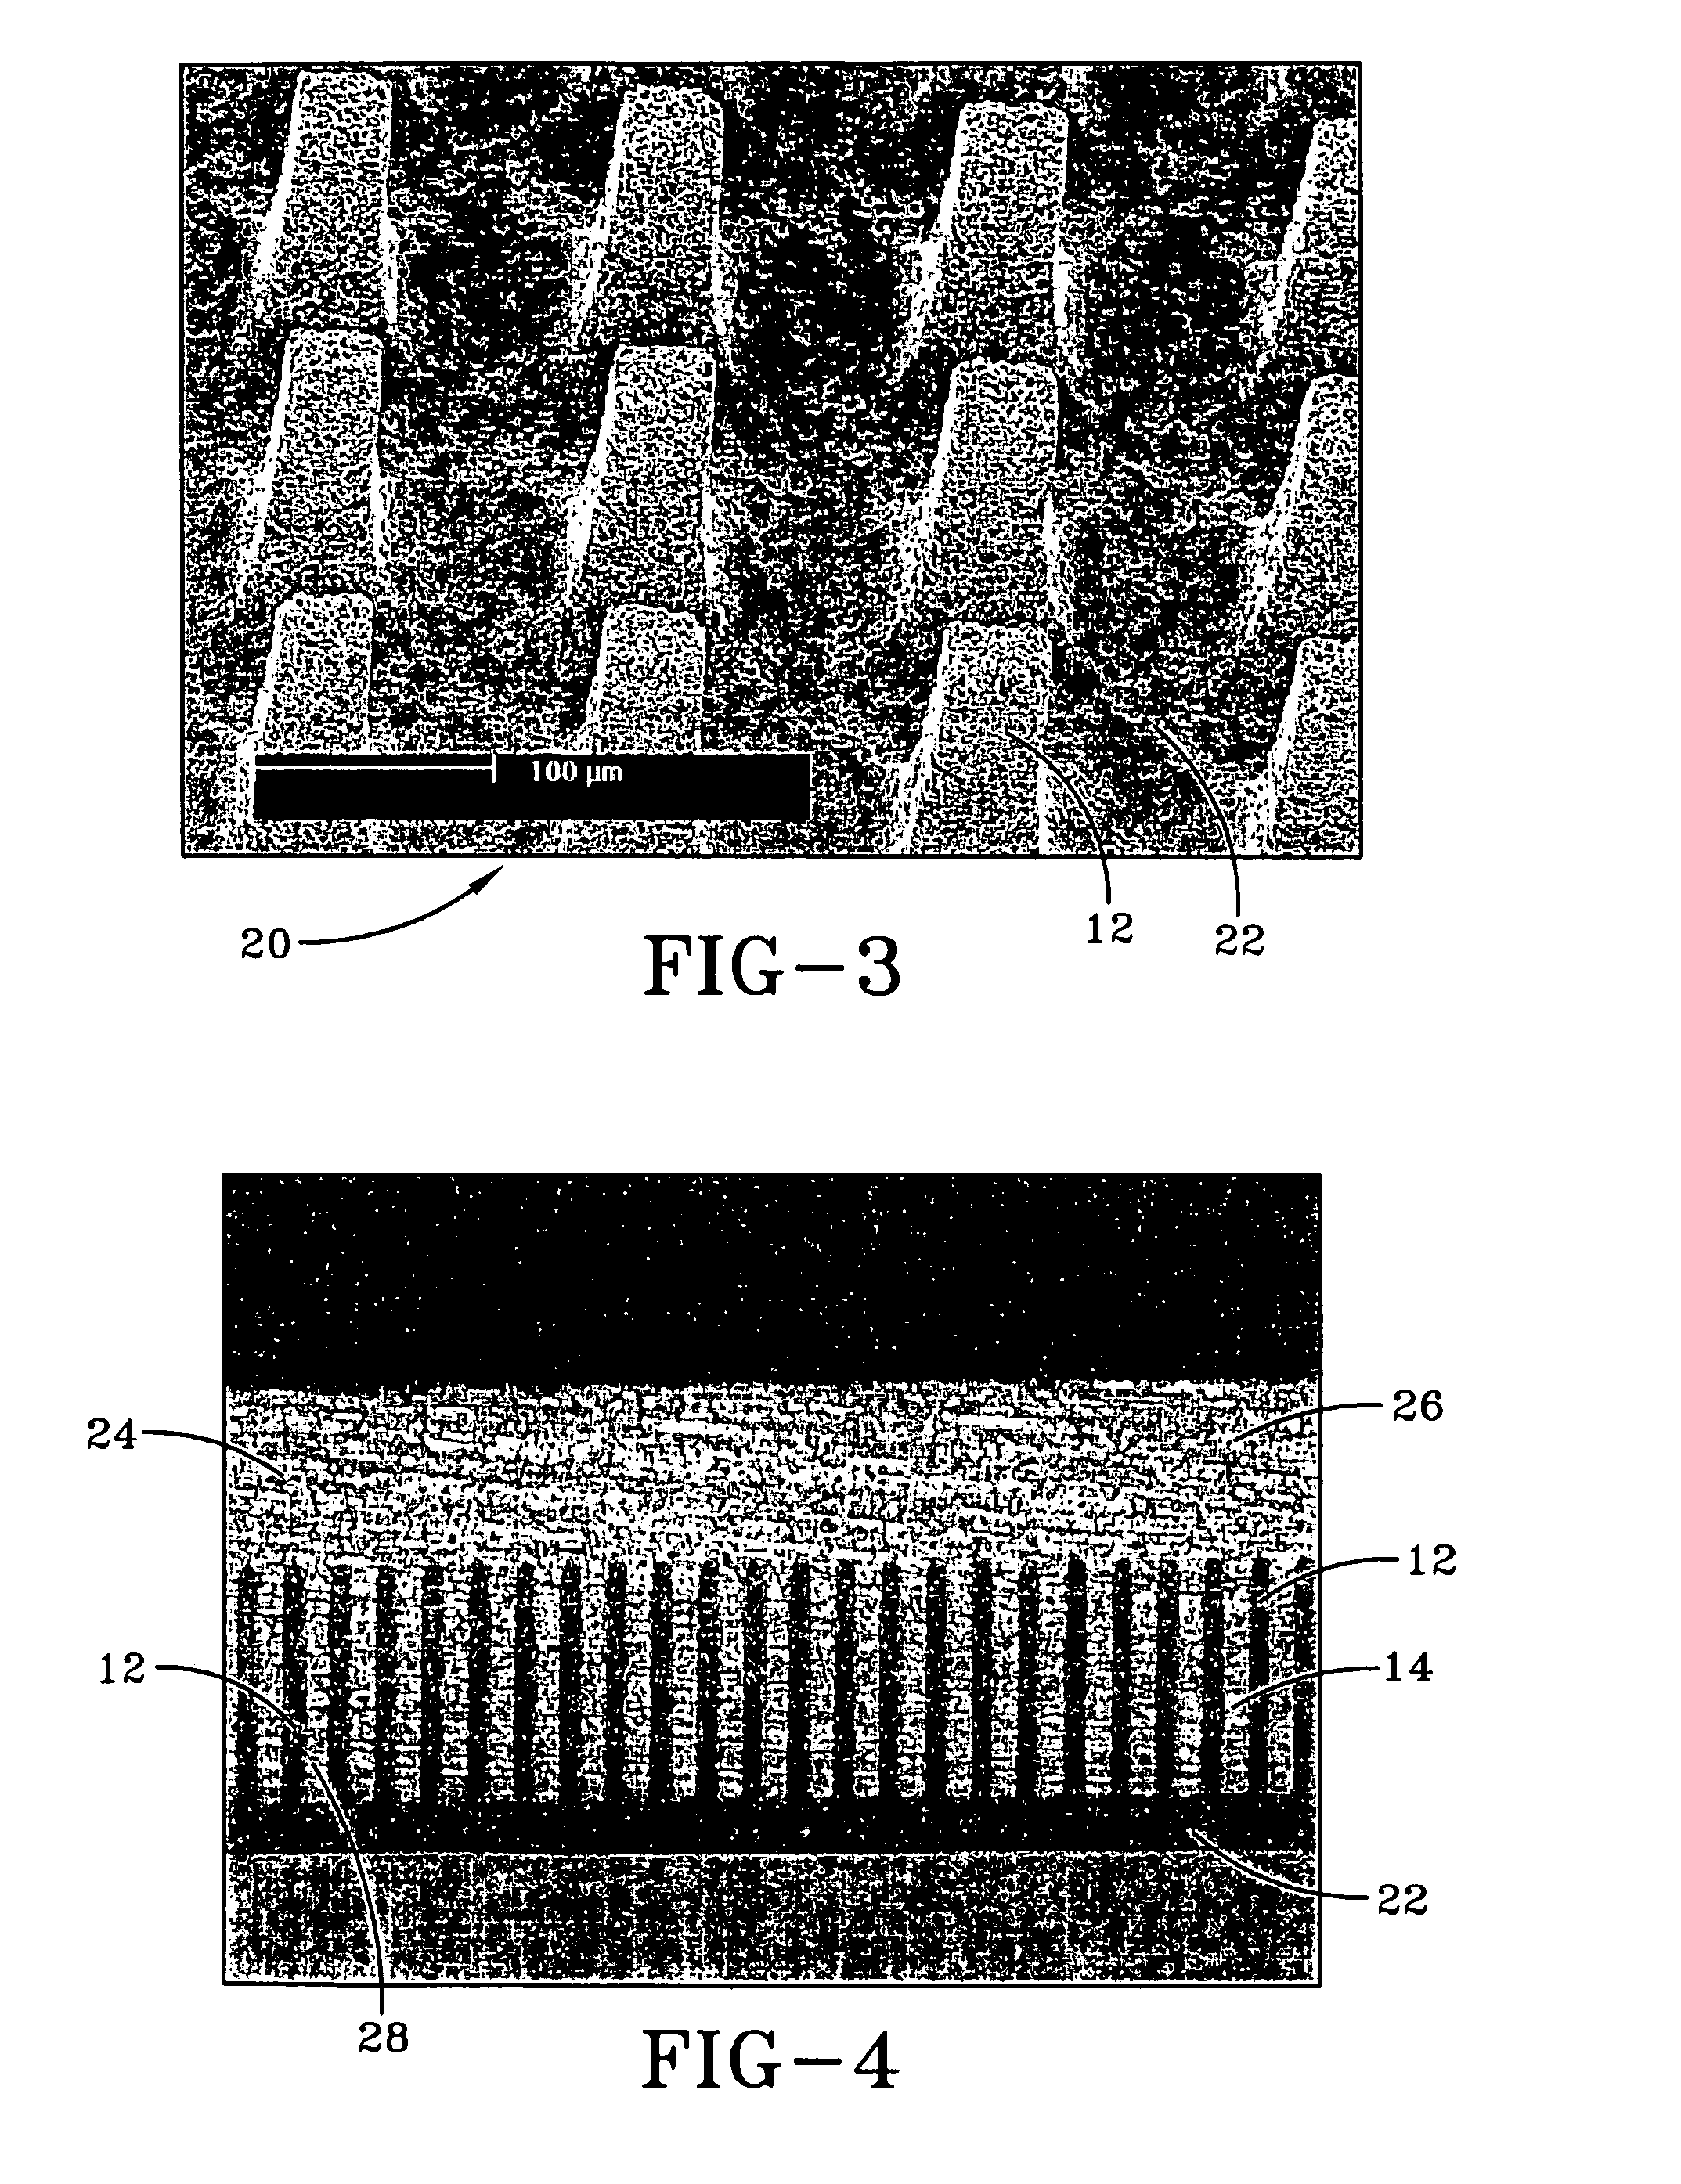 Process for plating a piezoelectric composite